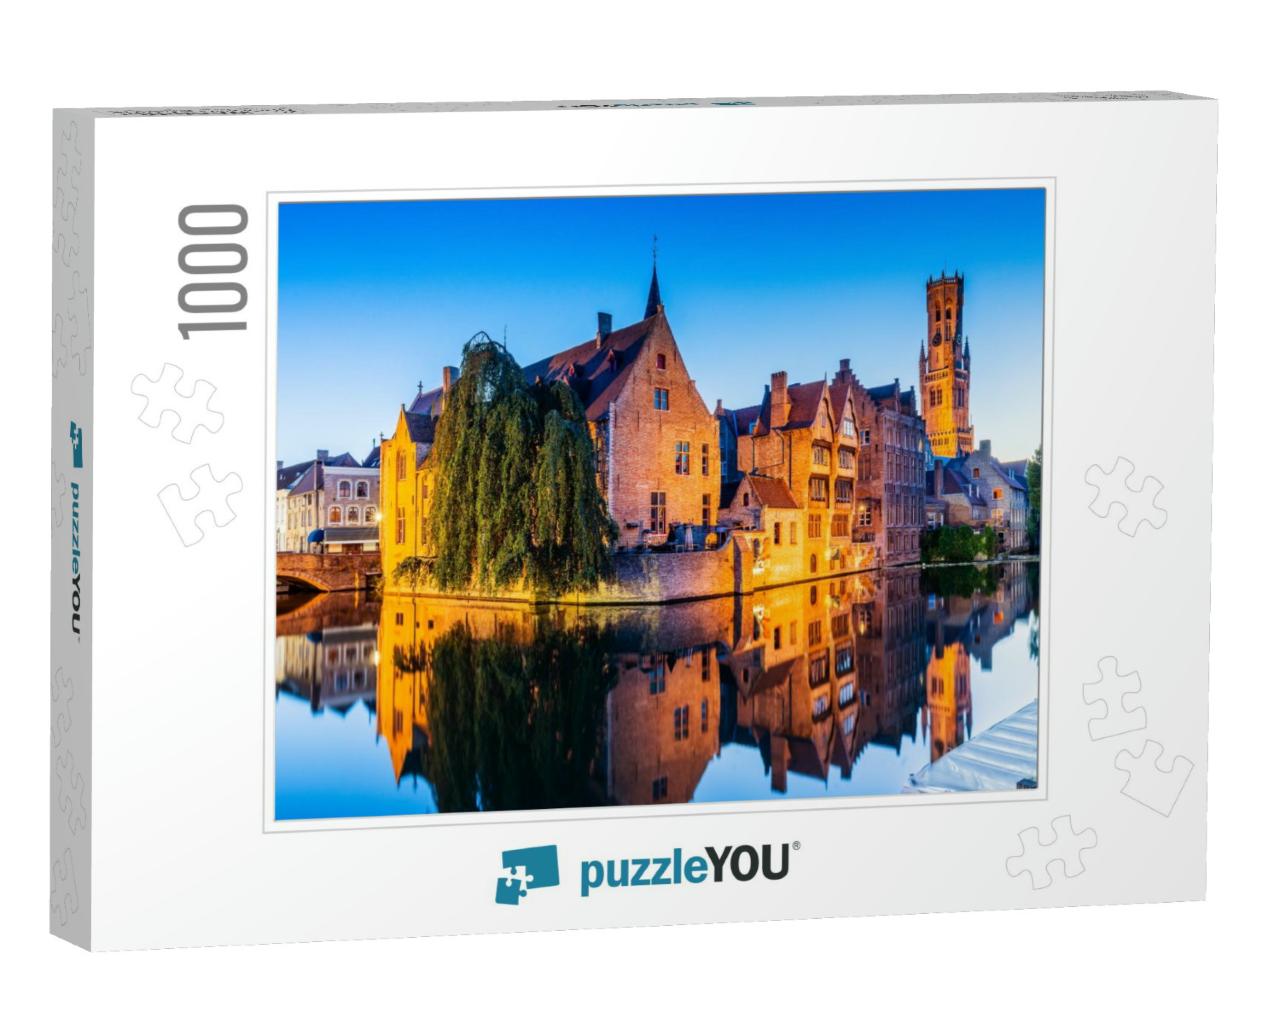 Bruges, Belgium. the Rozenhoedkaai Canal in Bruges with t... Jigsaw Puzzle with 1000 pieces